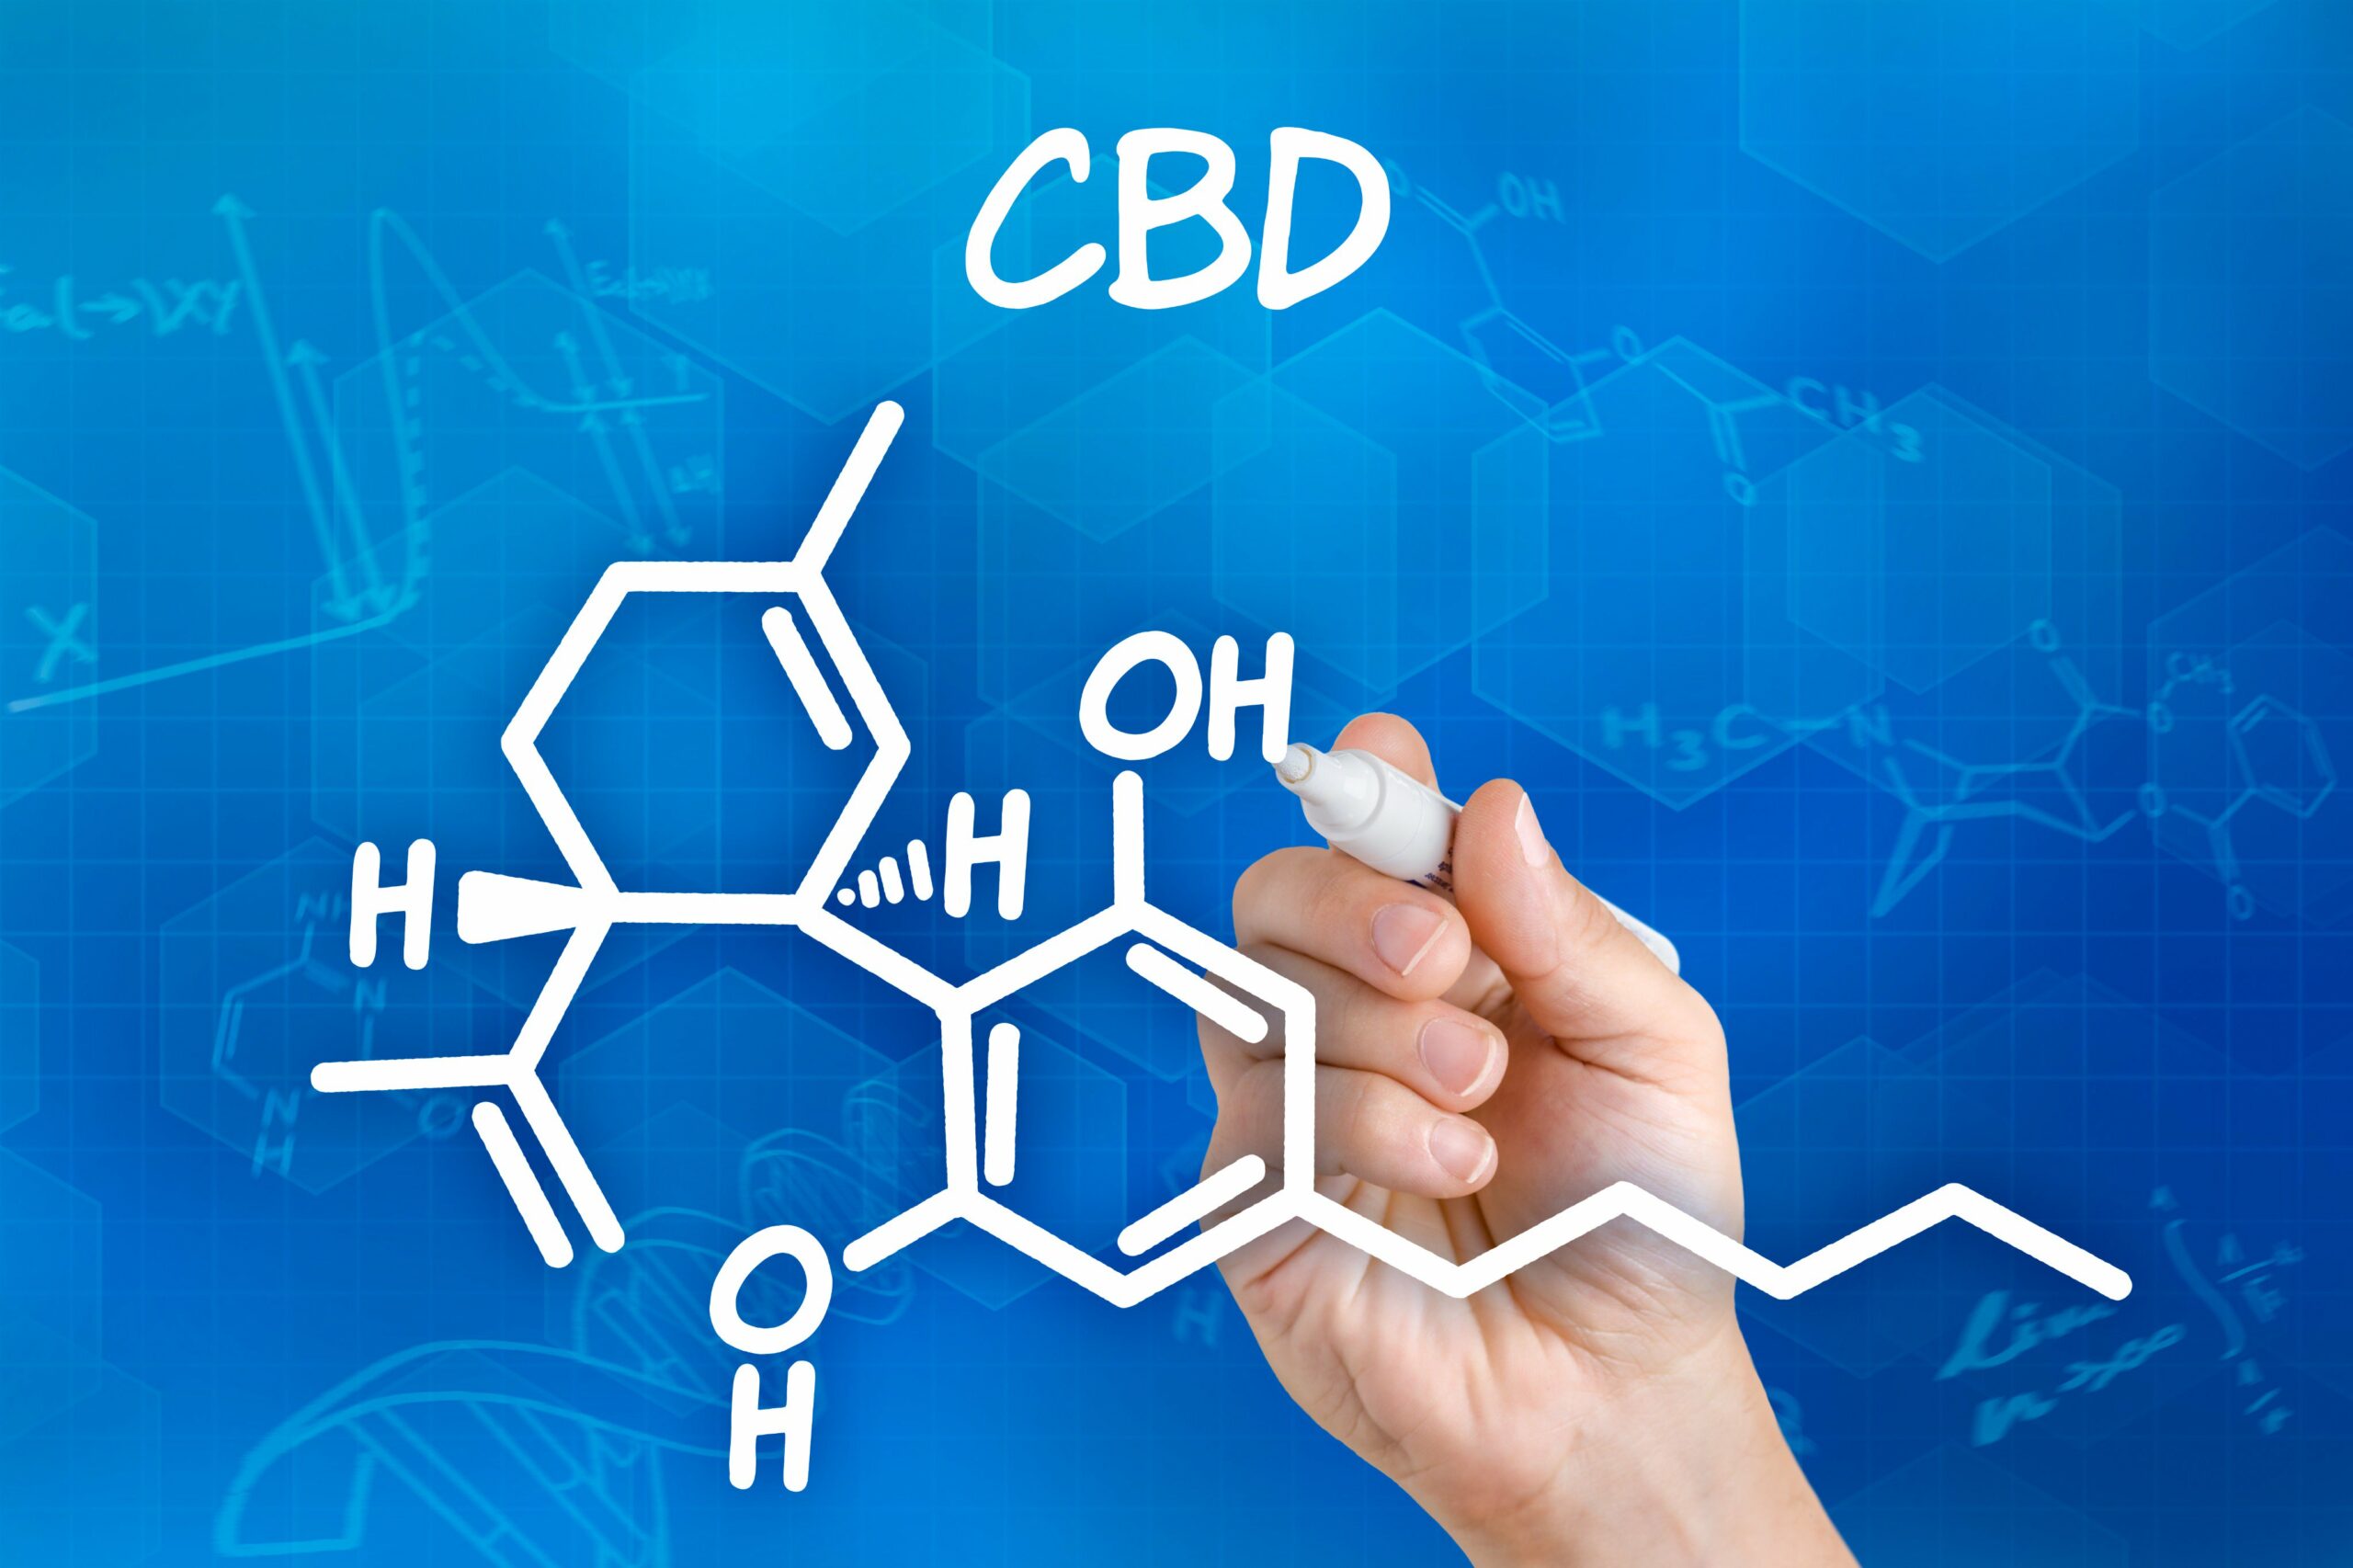 What Does CBD Stand For? (And What is it?)